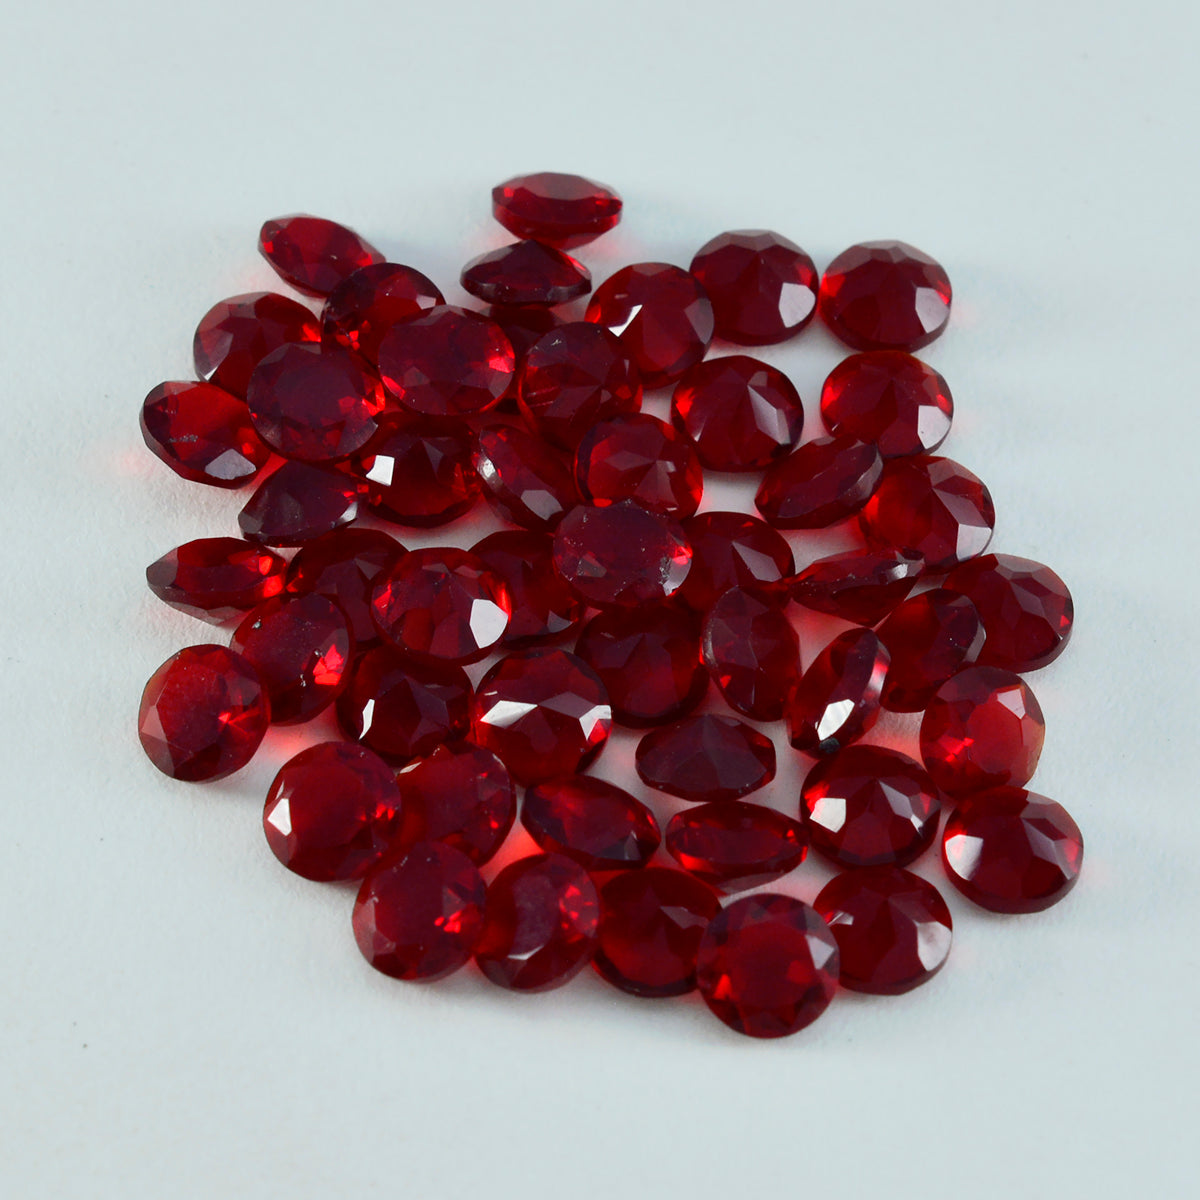 Riyogems 1PC Red Ruby CZ Faceted 4x4 mm Round Shape A+1 Quality Stone